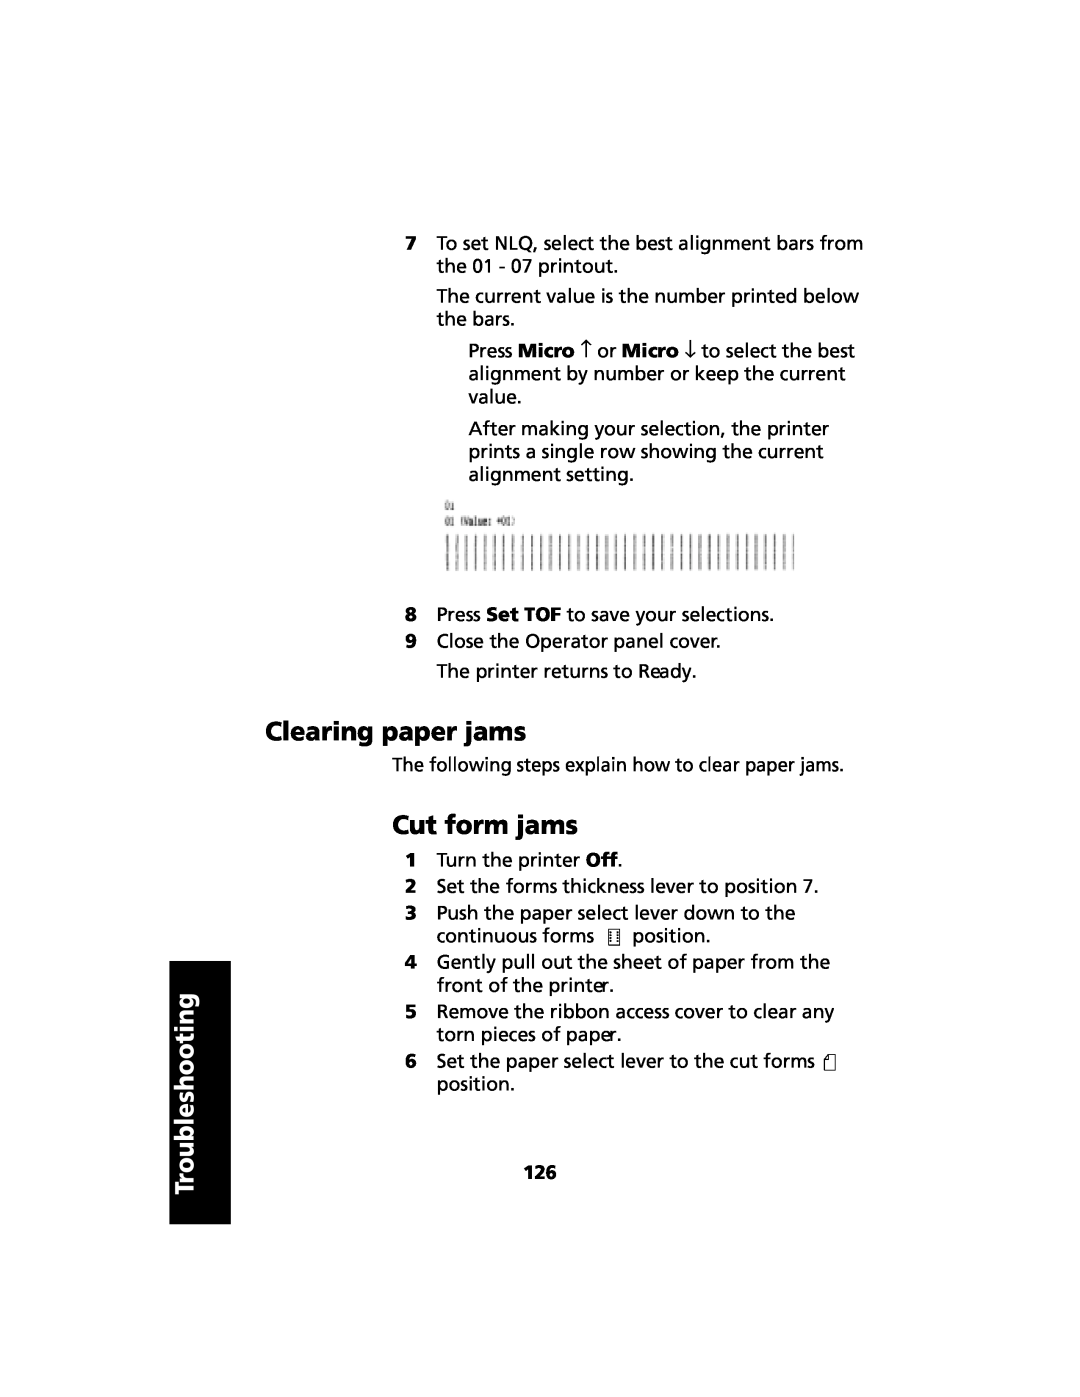 Lexmark 2480 manual Clearing paper jams, Cut form jams, Troubleshooting 